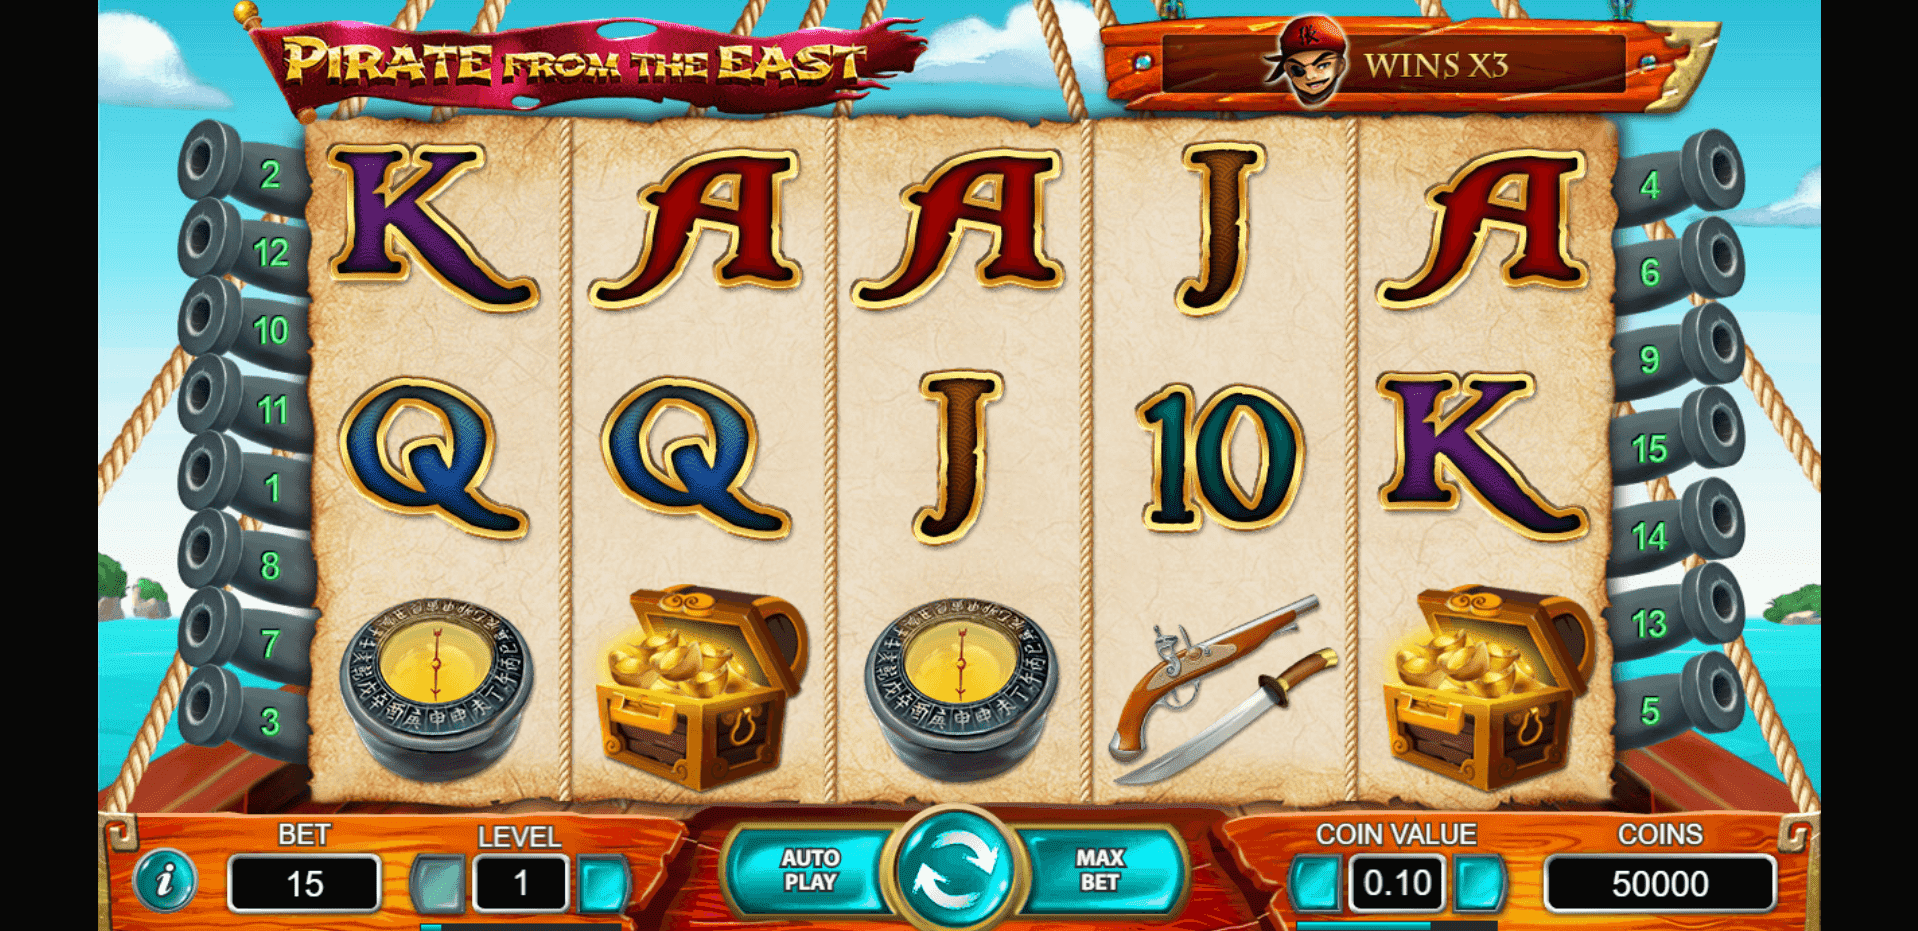 Pirate From the East slot play free